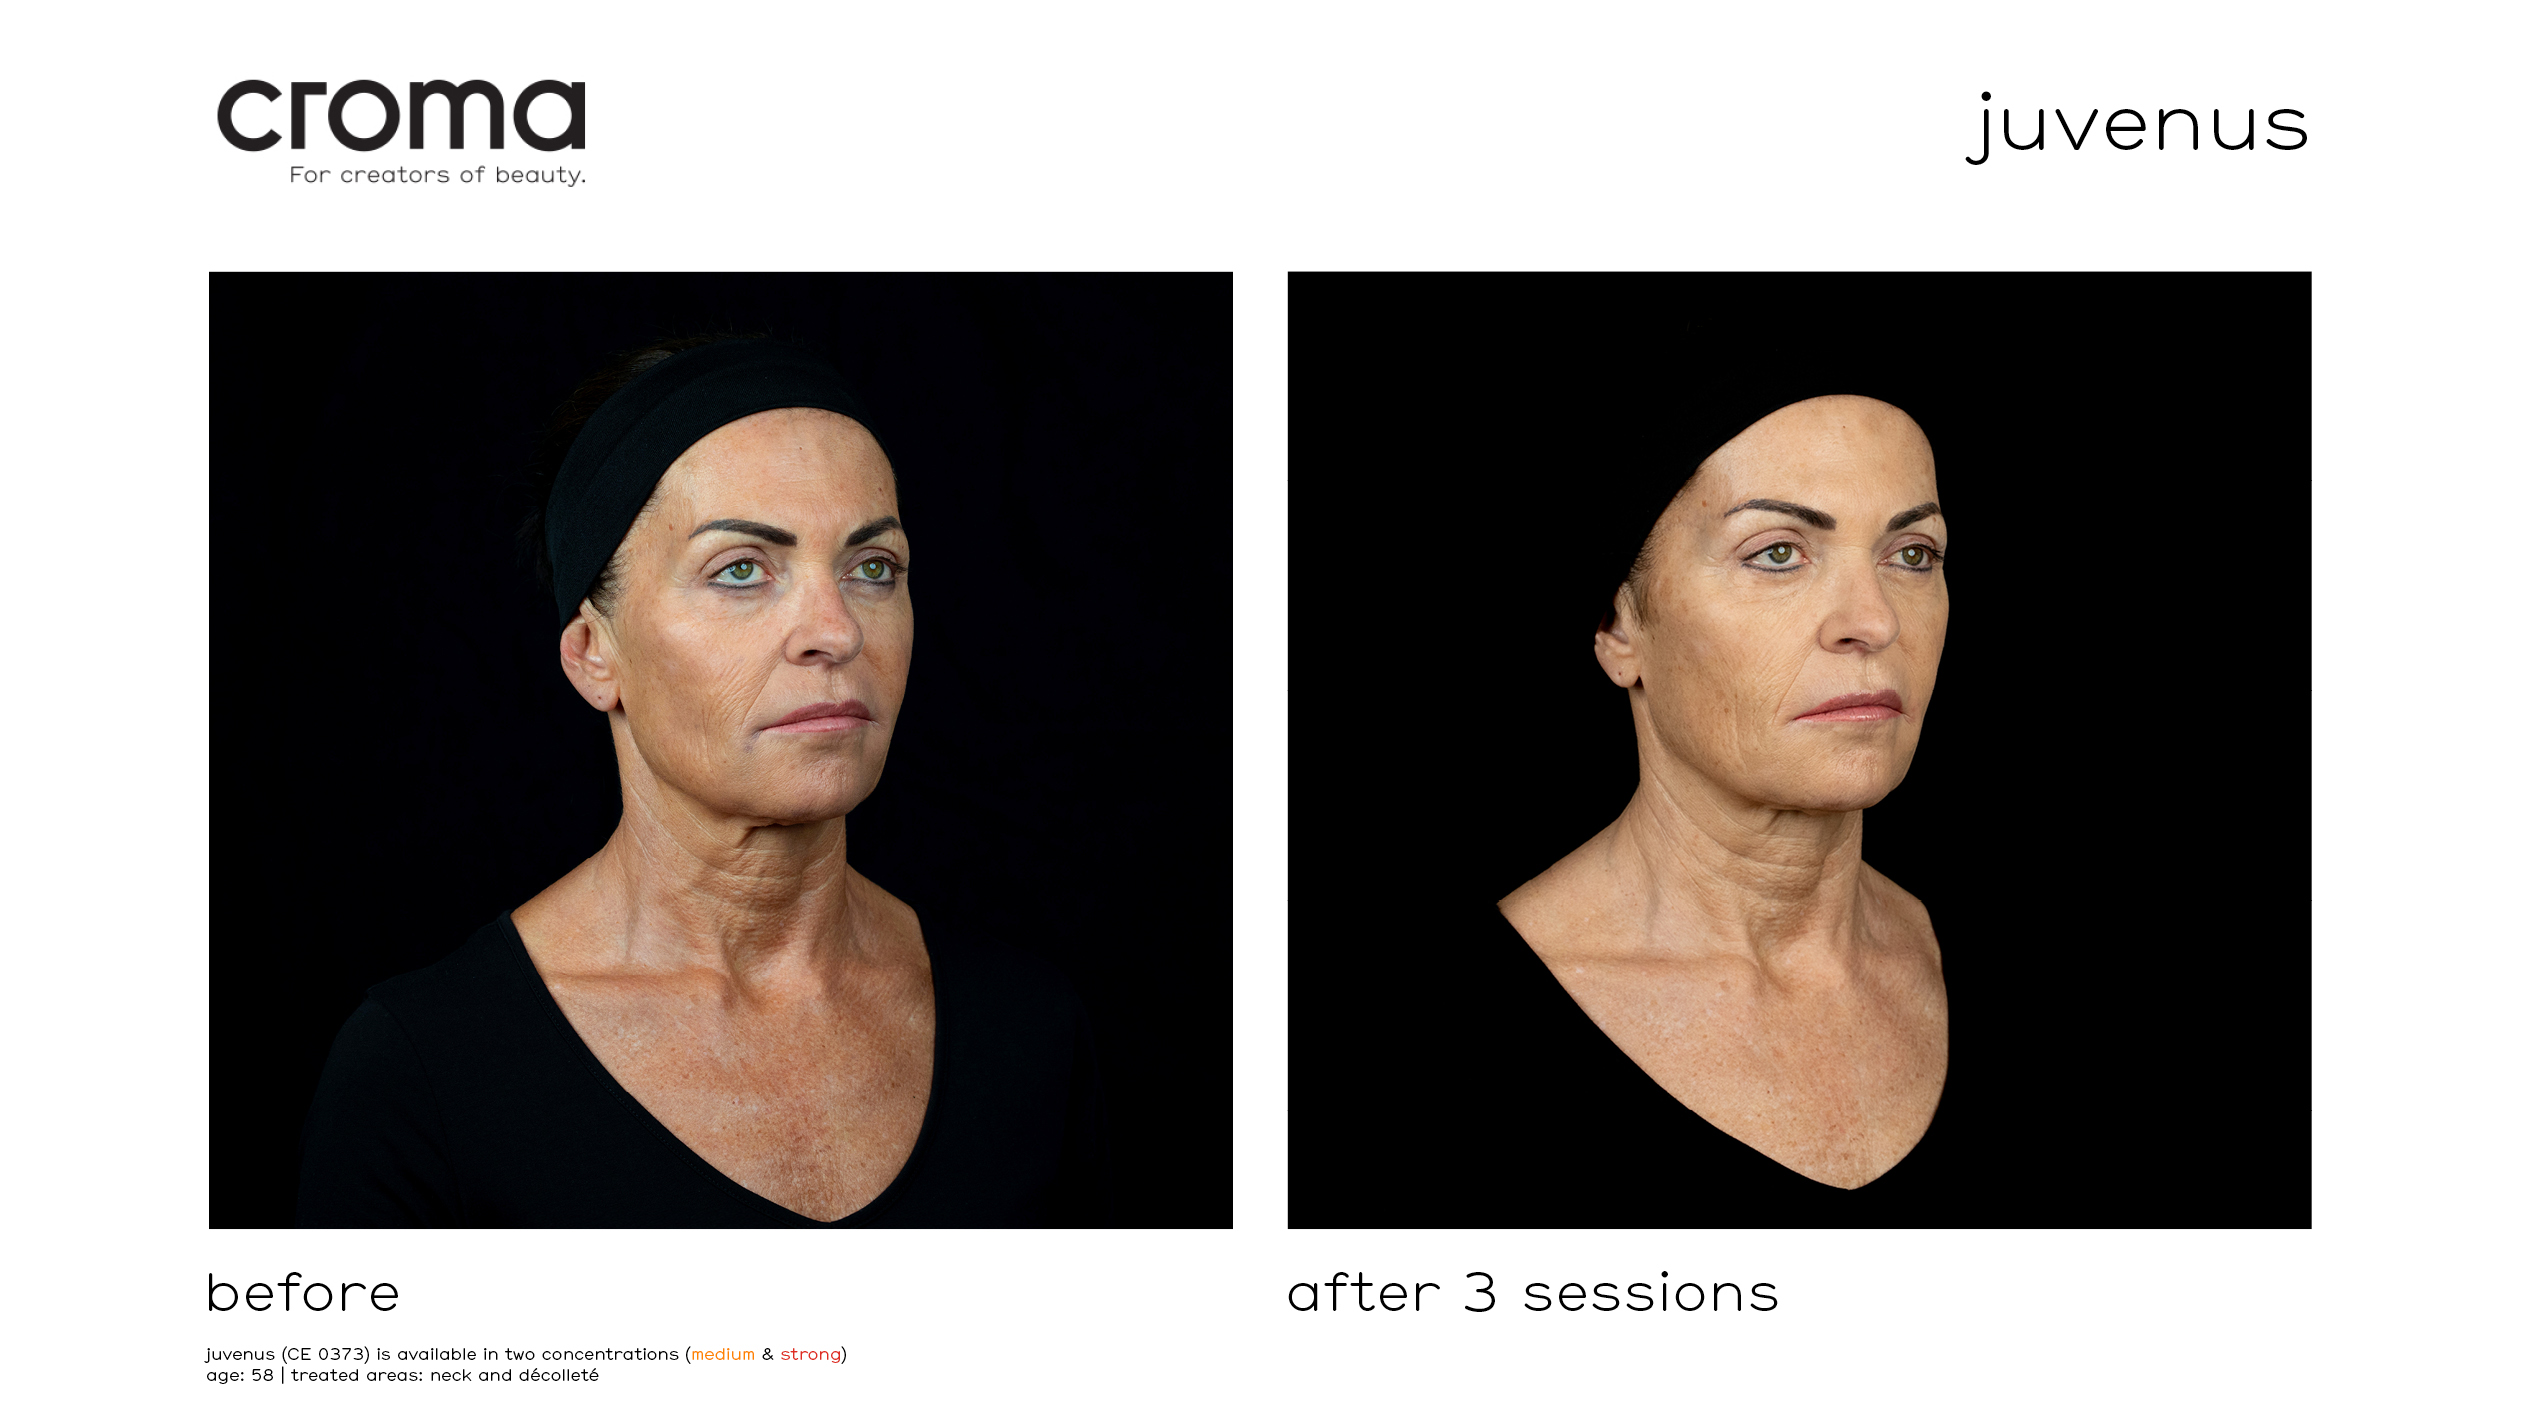 before-after3sessions-juvenus-p1_ppt_frontal-right